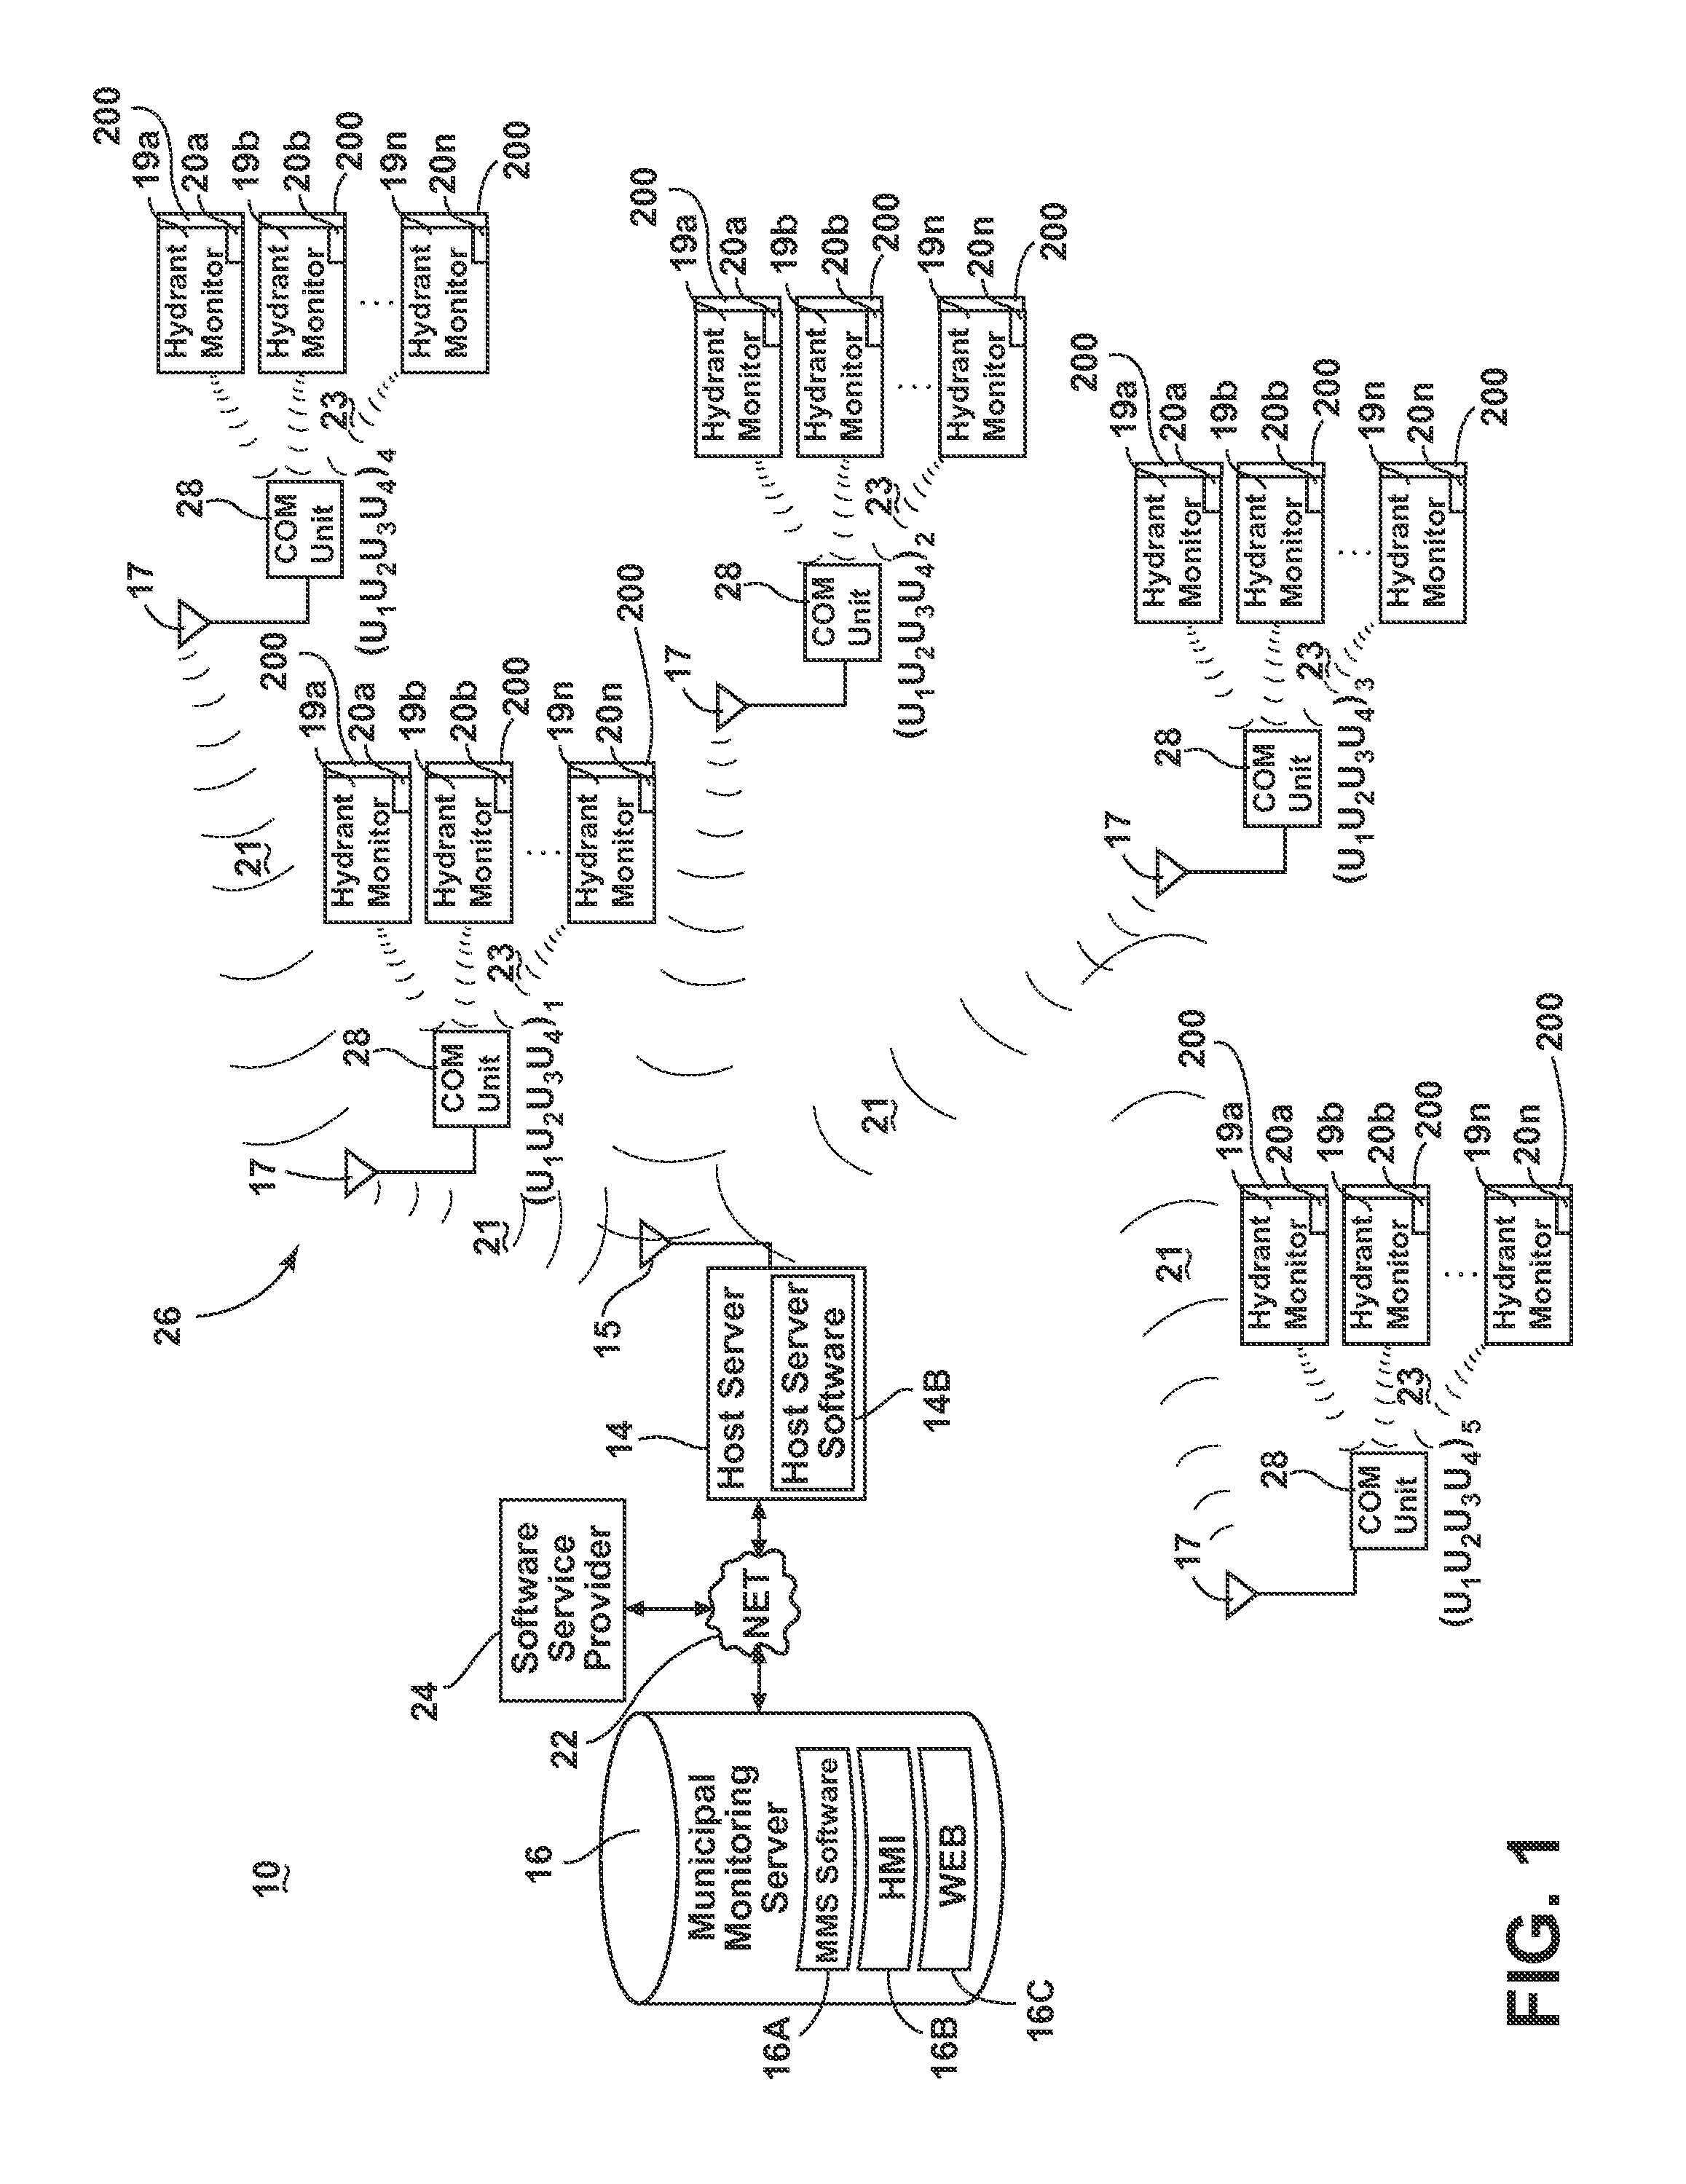 Hydrant monitoring system and method